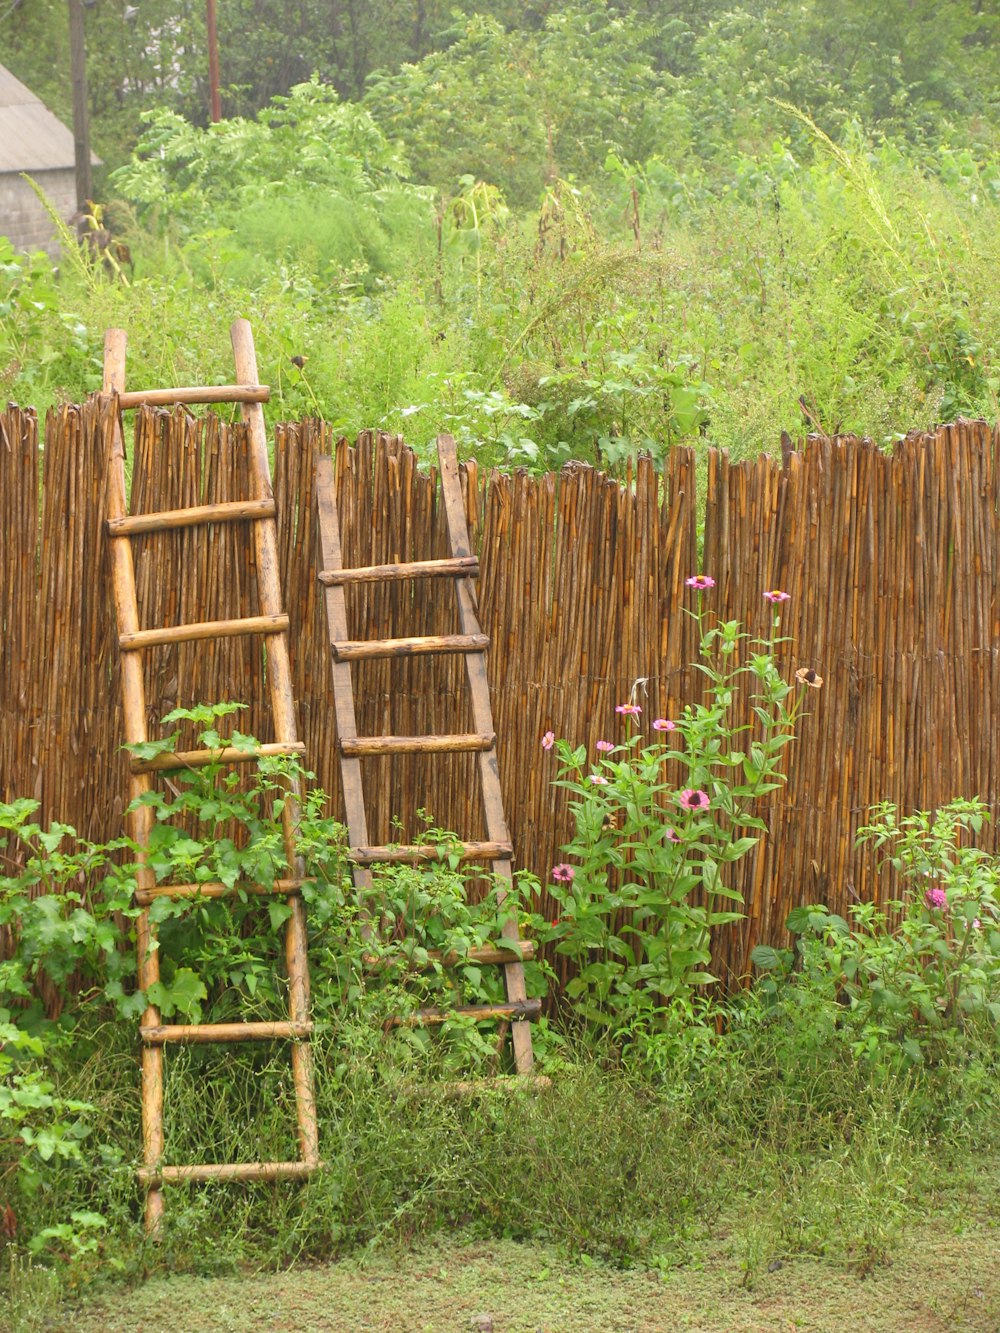 a wooden ladder leaning against a bamboo fence